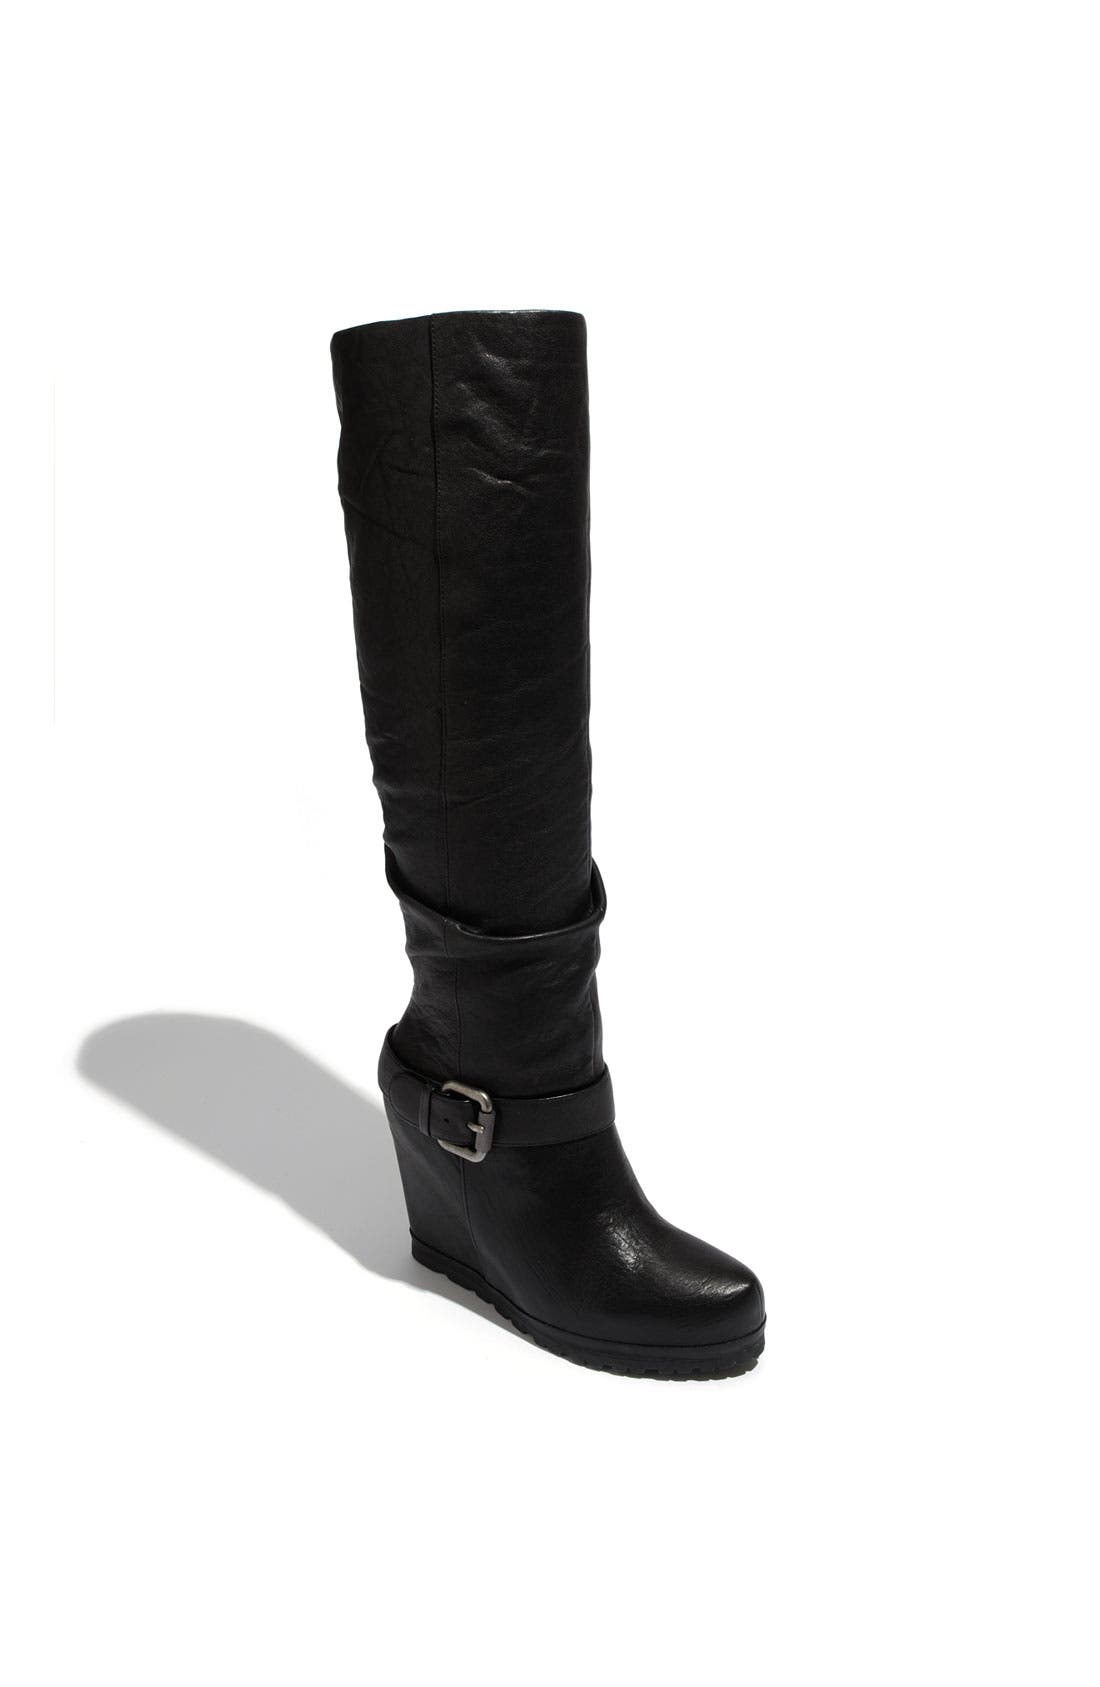 vera wang leather boots